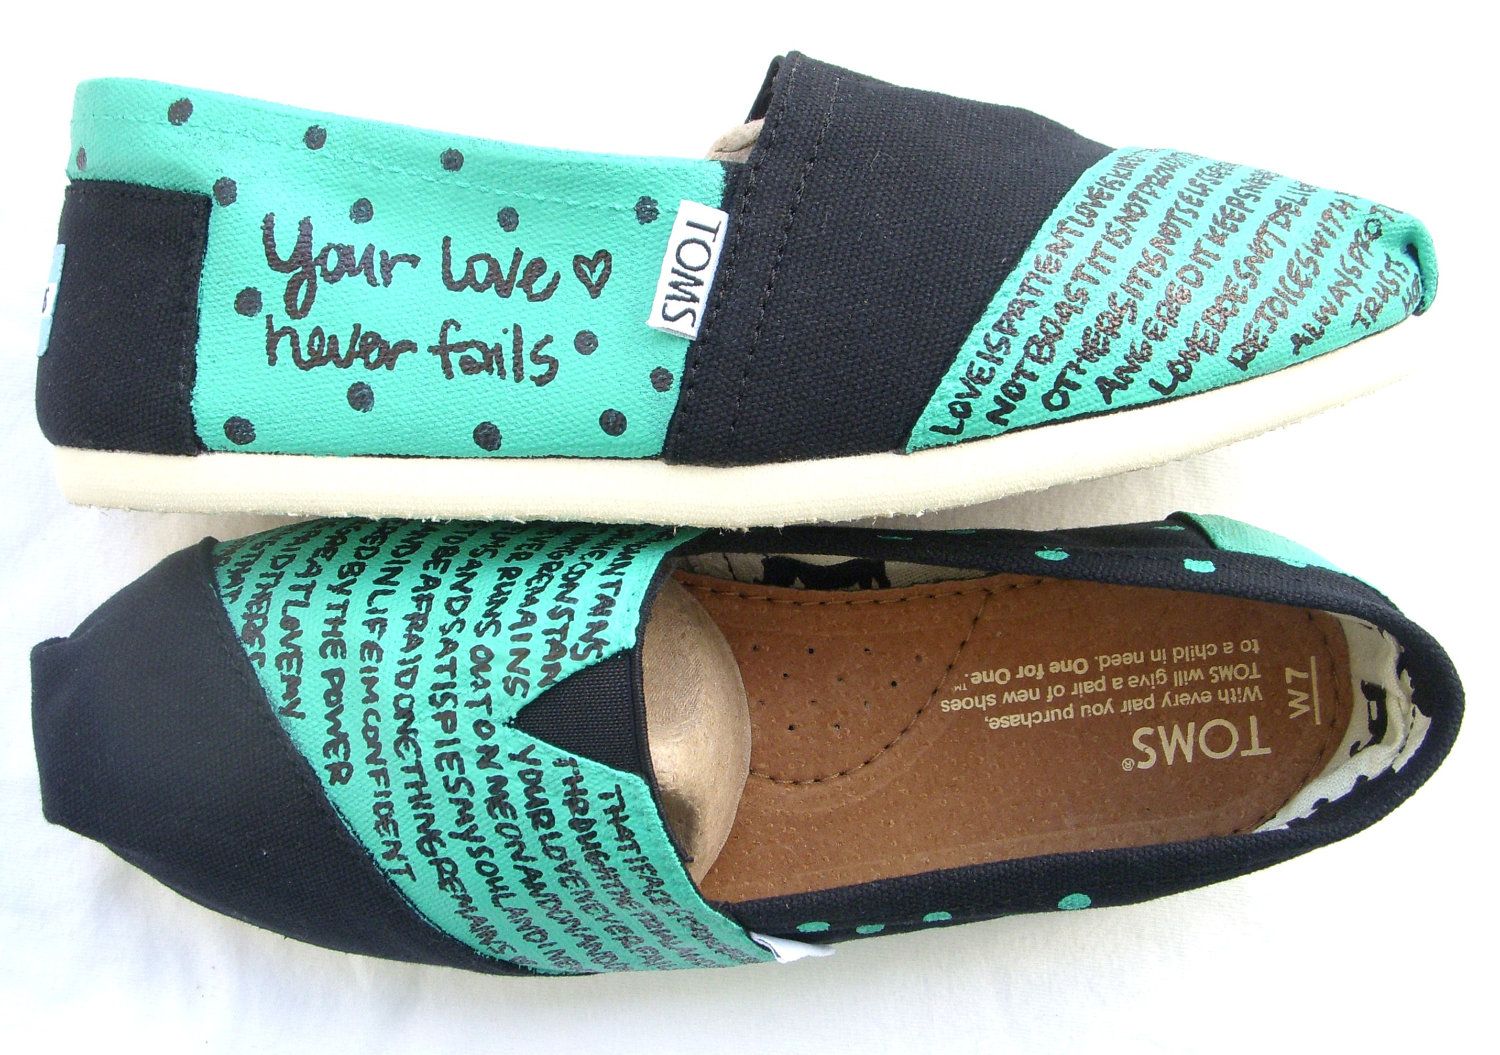 The Hailey Teal and Black Custom TOMS by FruitfulFeet on Etsy